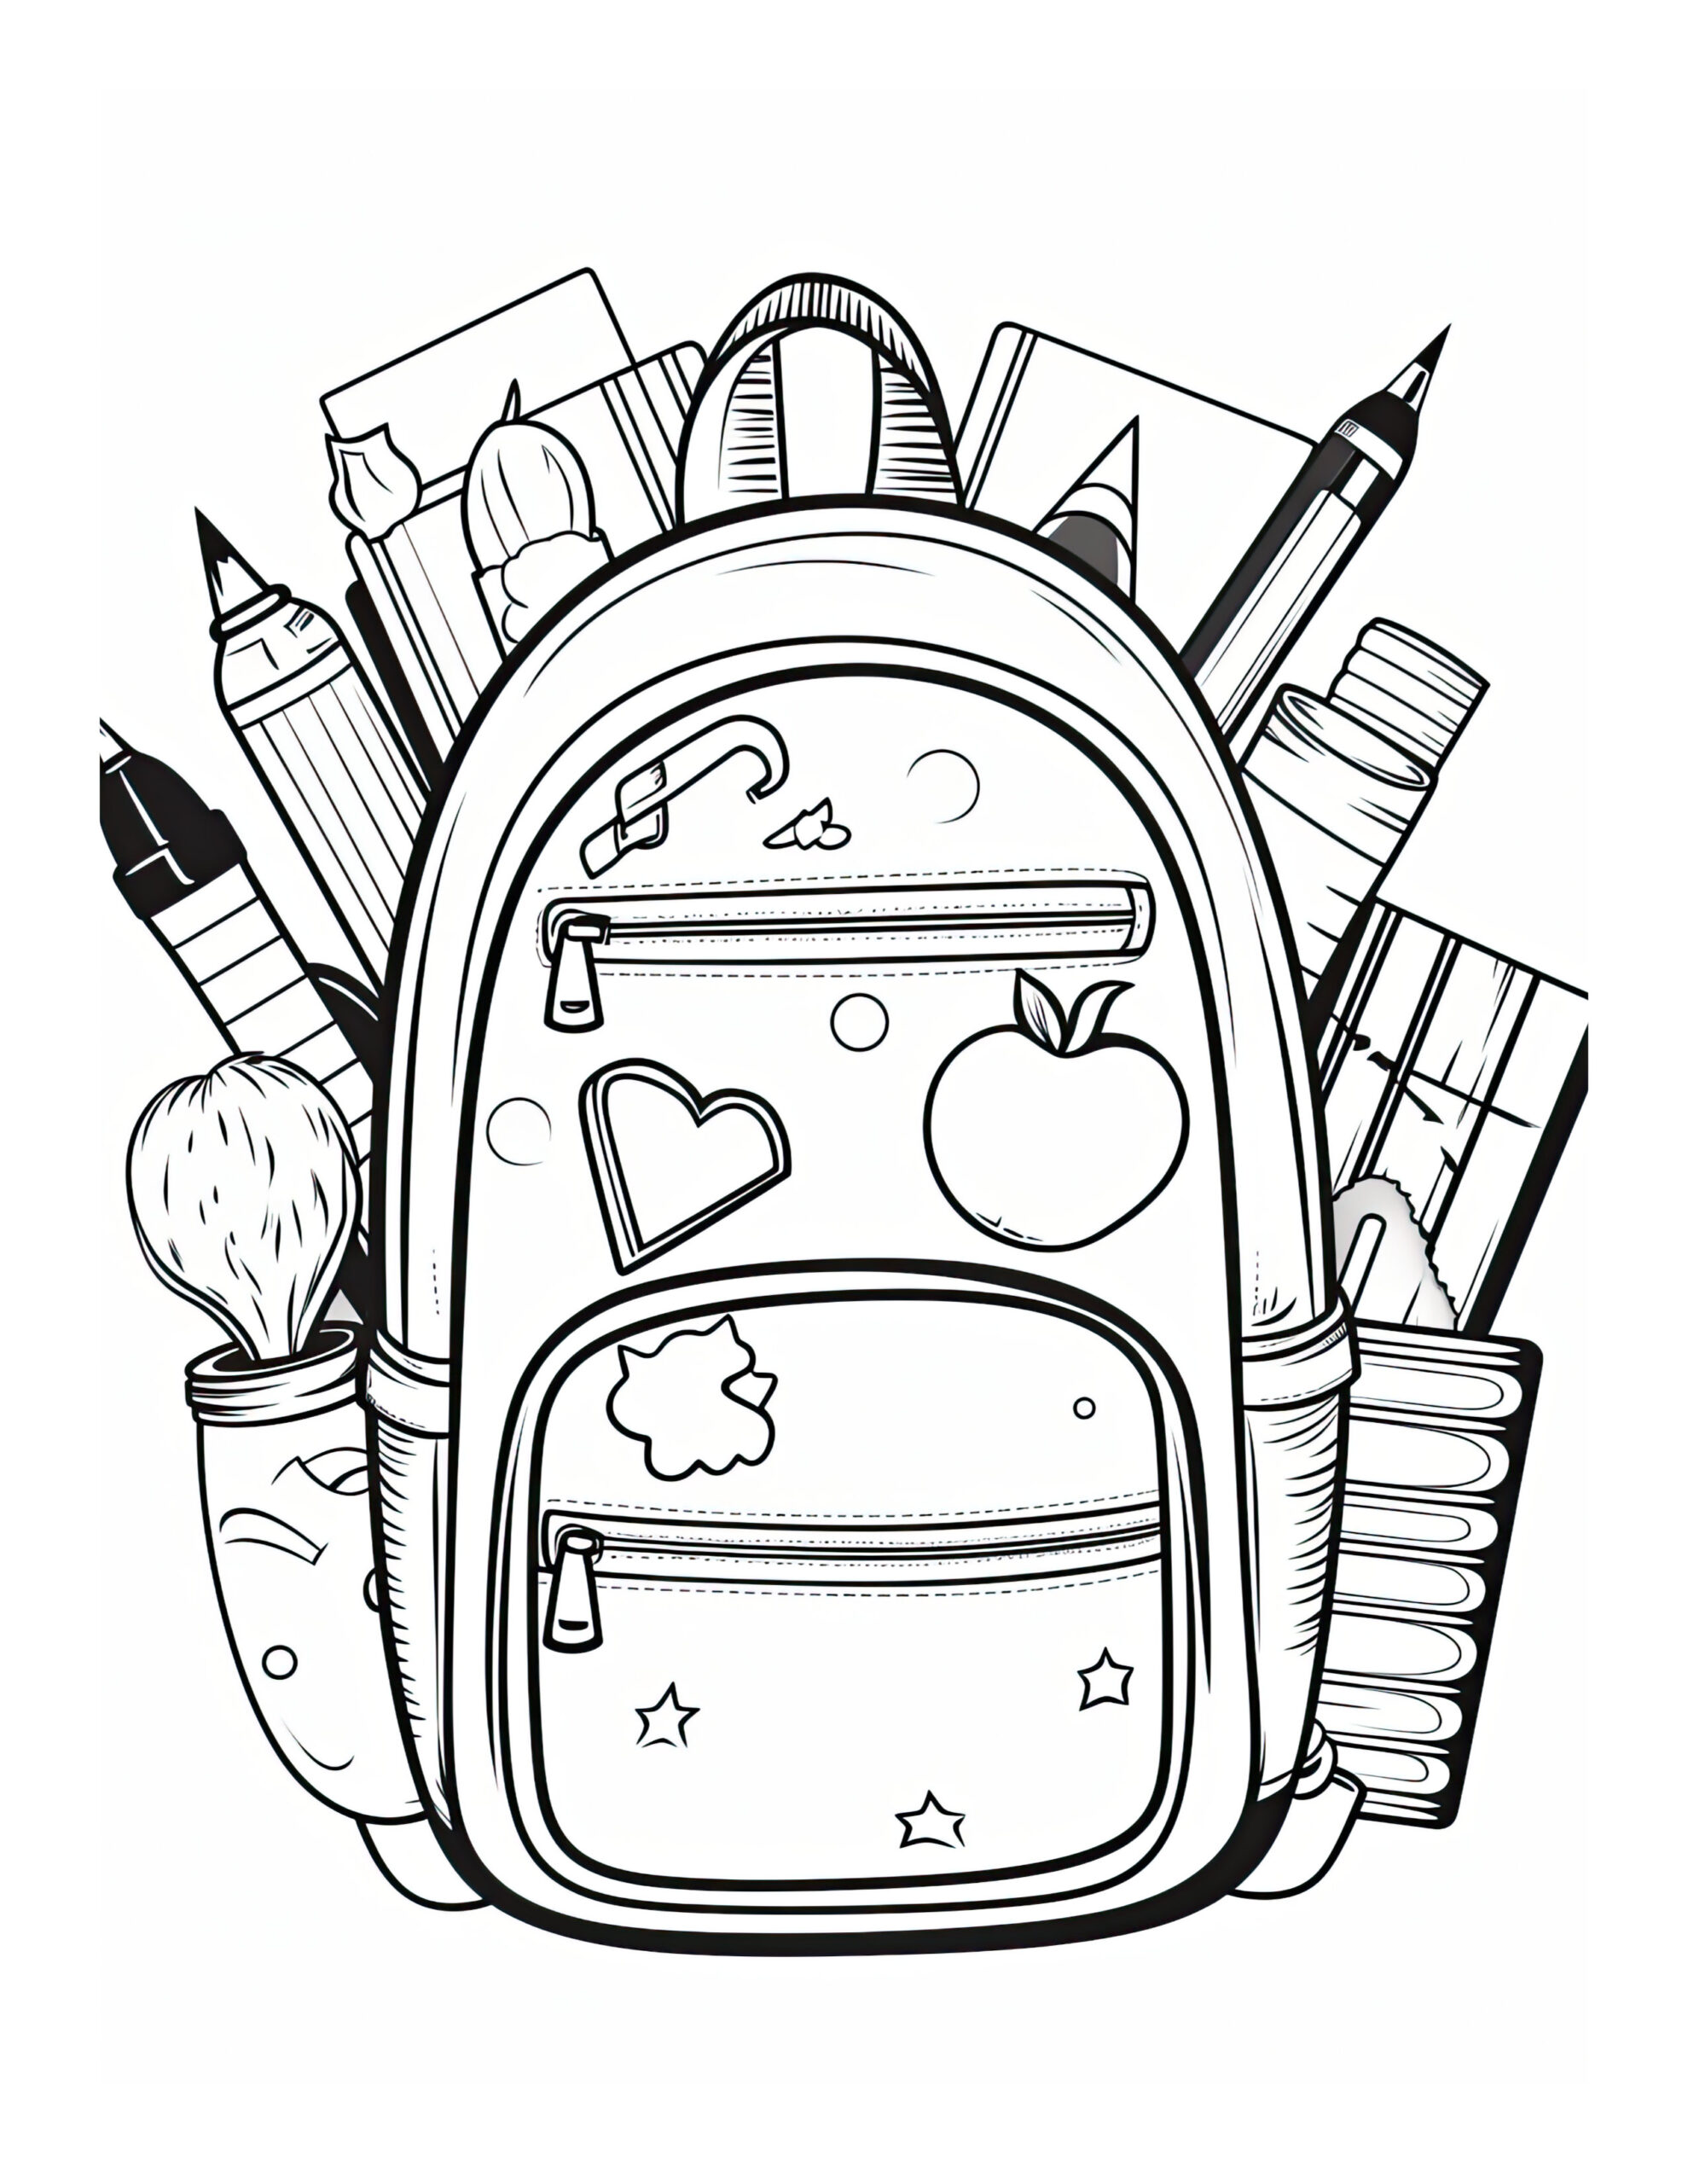 free-back-to-school-coloring-page-7-free-coloring-adventure